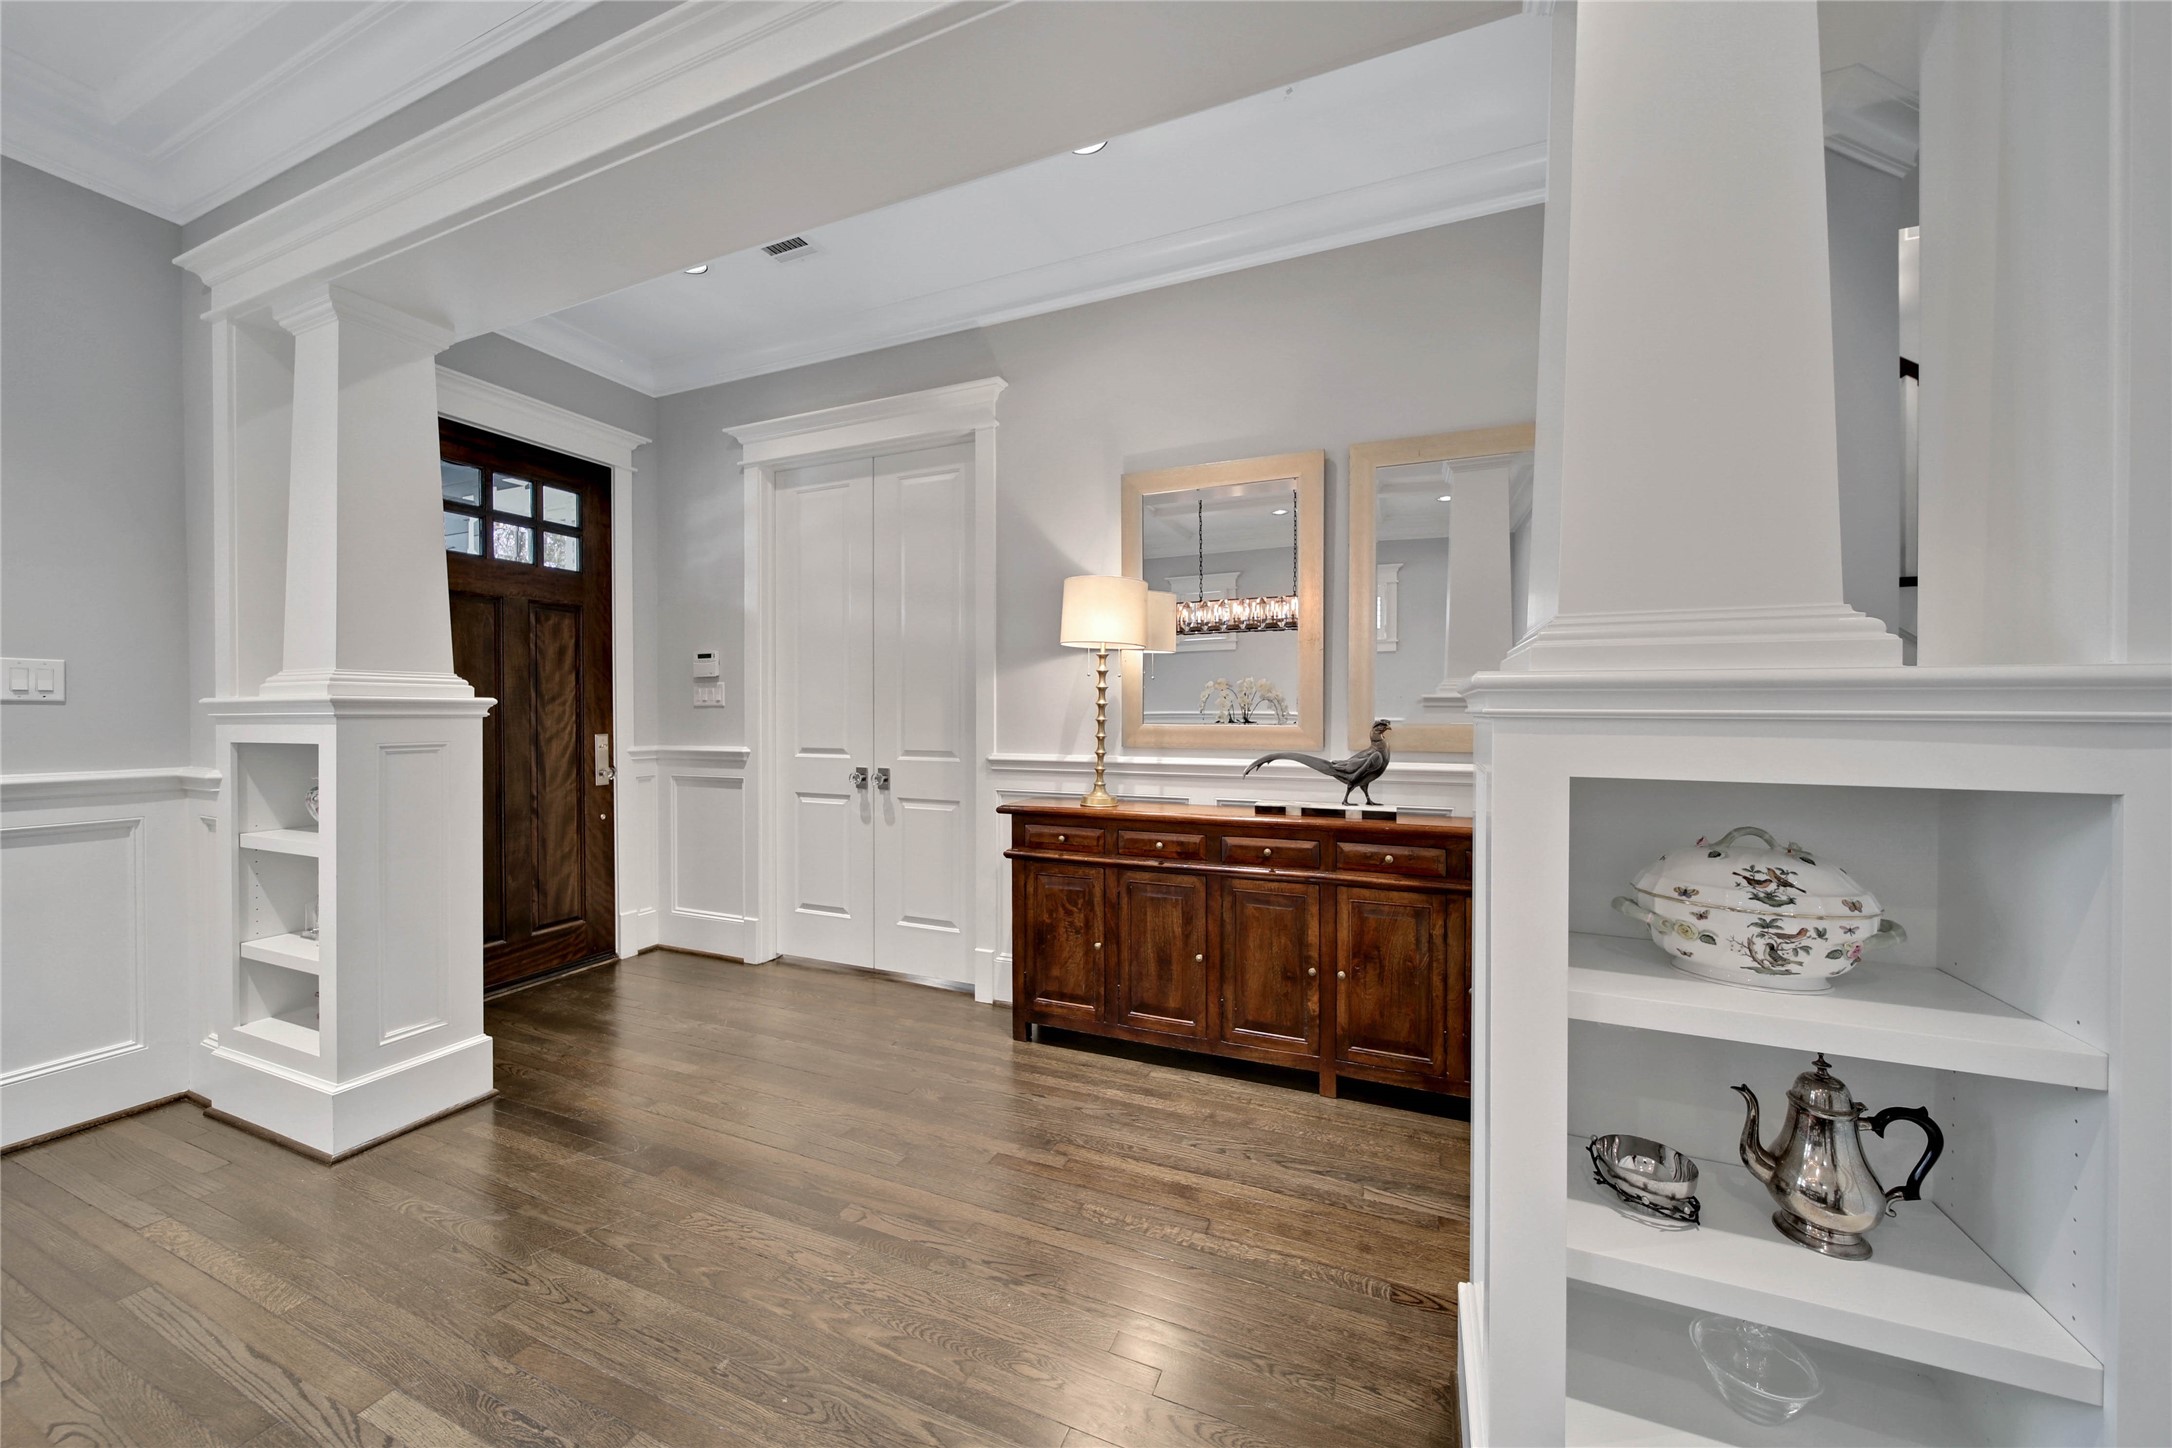 Step into luxury and style as you enter this beautiful entryway.